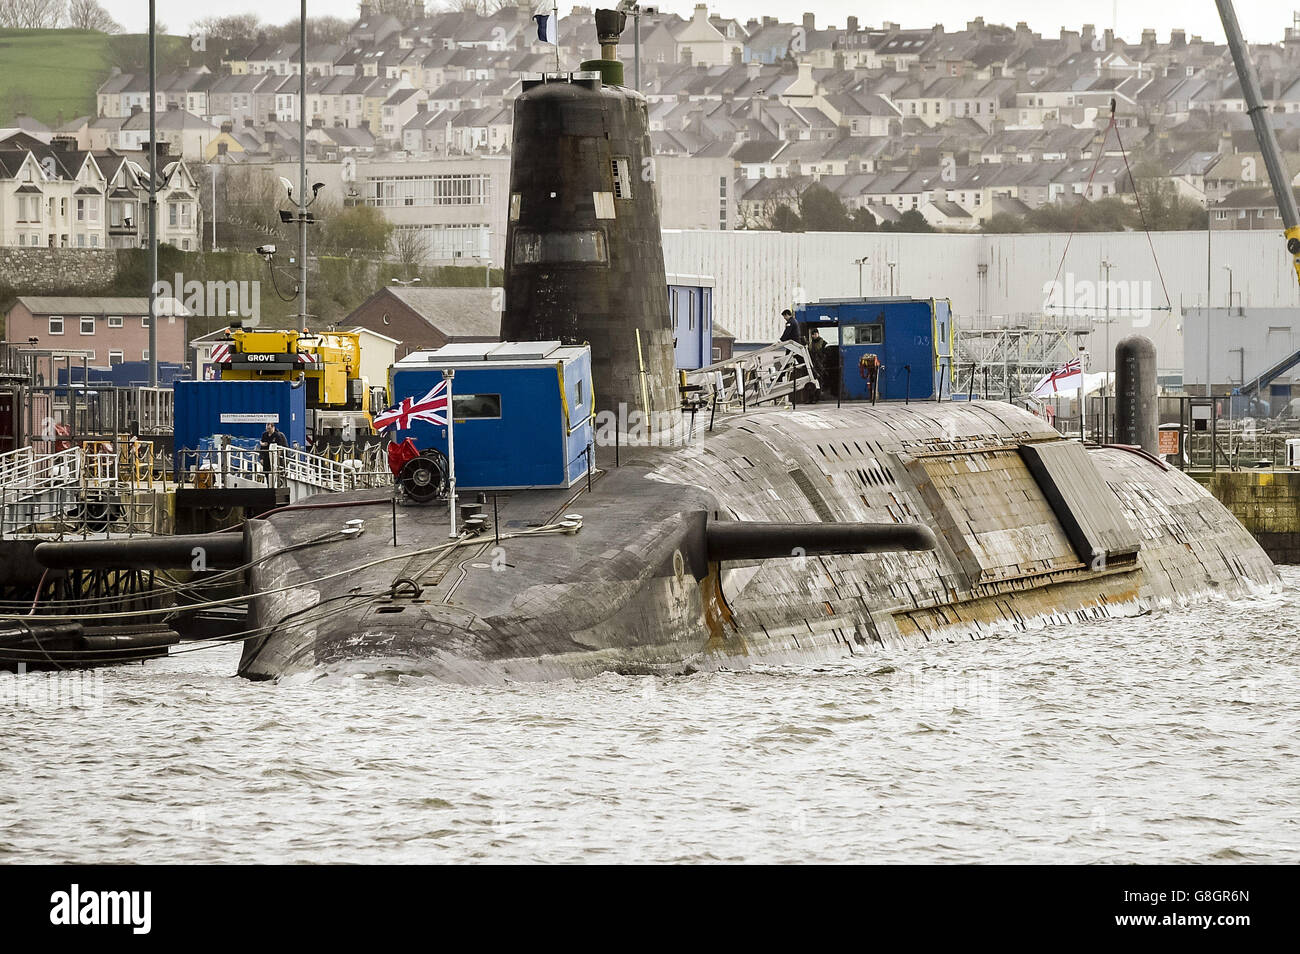 HMS Vanguard, one of the UK's nuclear deterrent V-Class submarines, sits docked at Devonport, Plymouth, having a refit, estimated at &Acirc;&pound;200m. Stock Photo